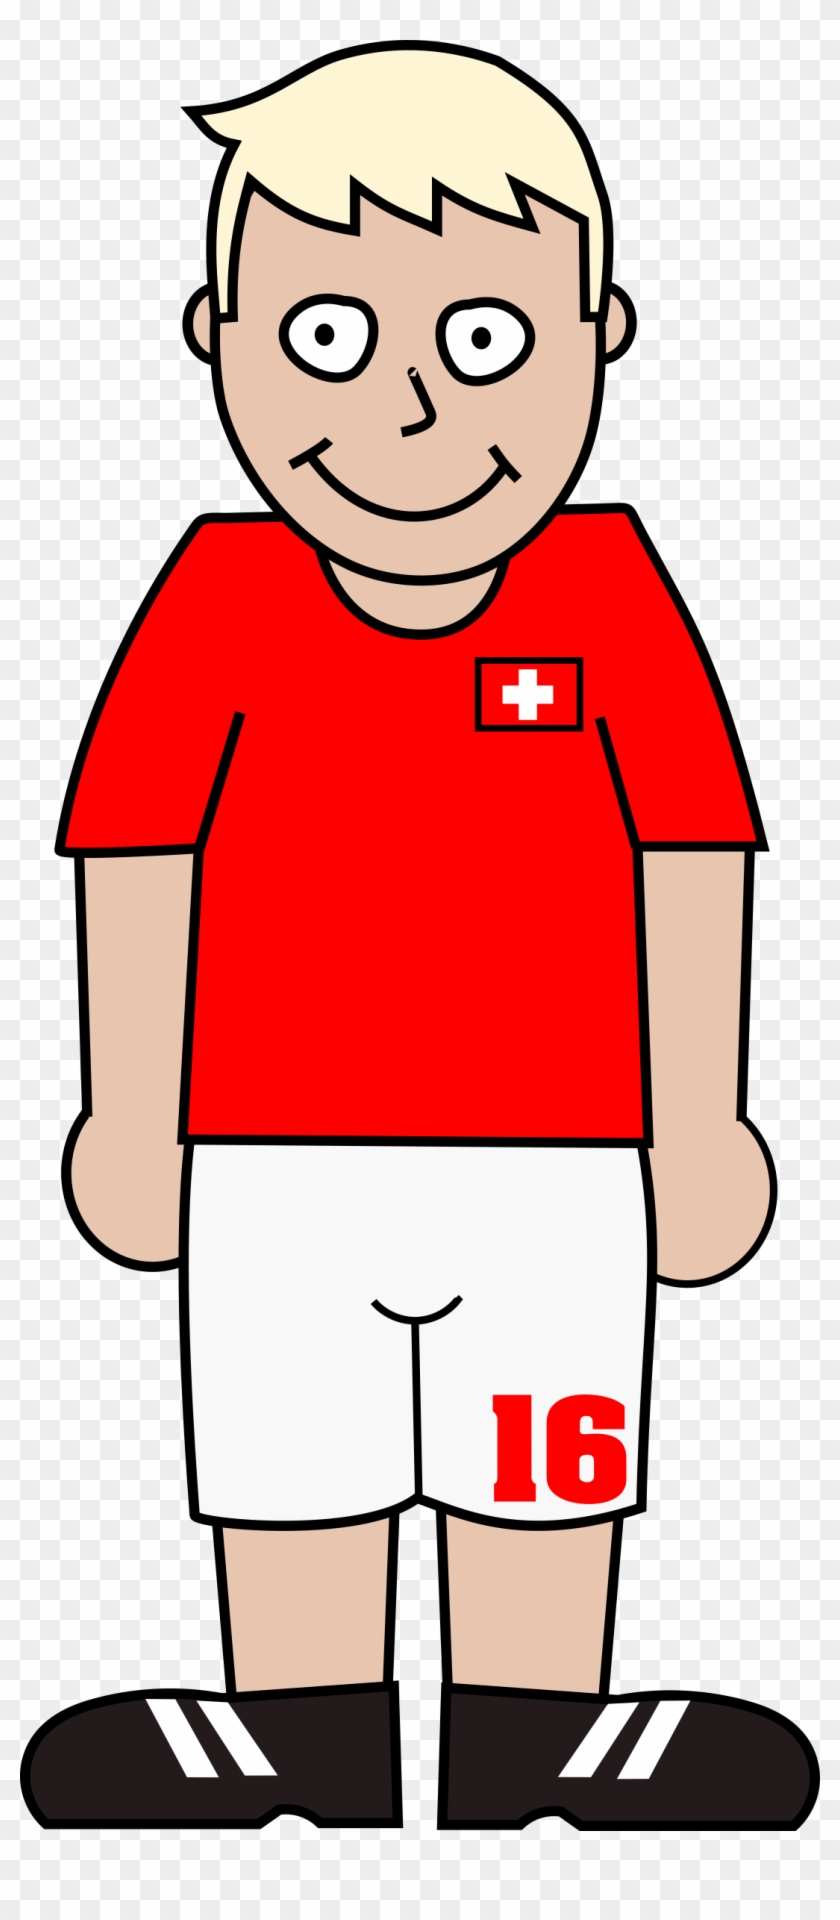 Big Image - World Cup Soccer Player Clipart Png #1169089